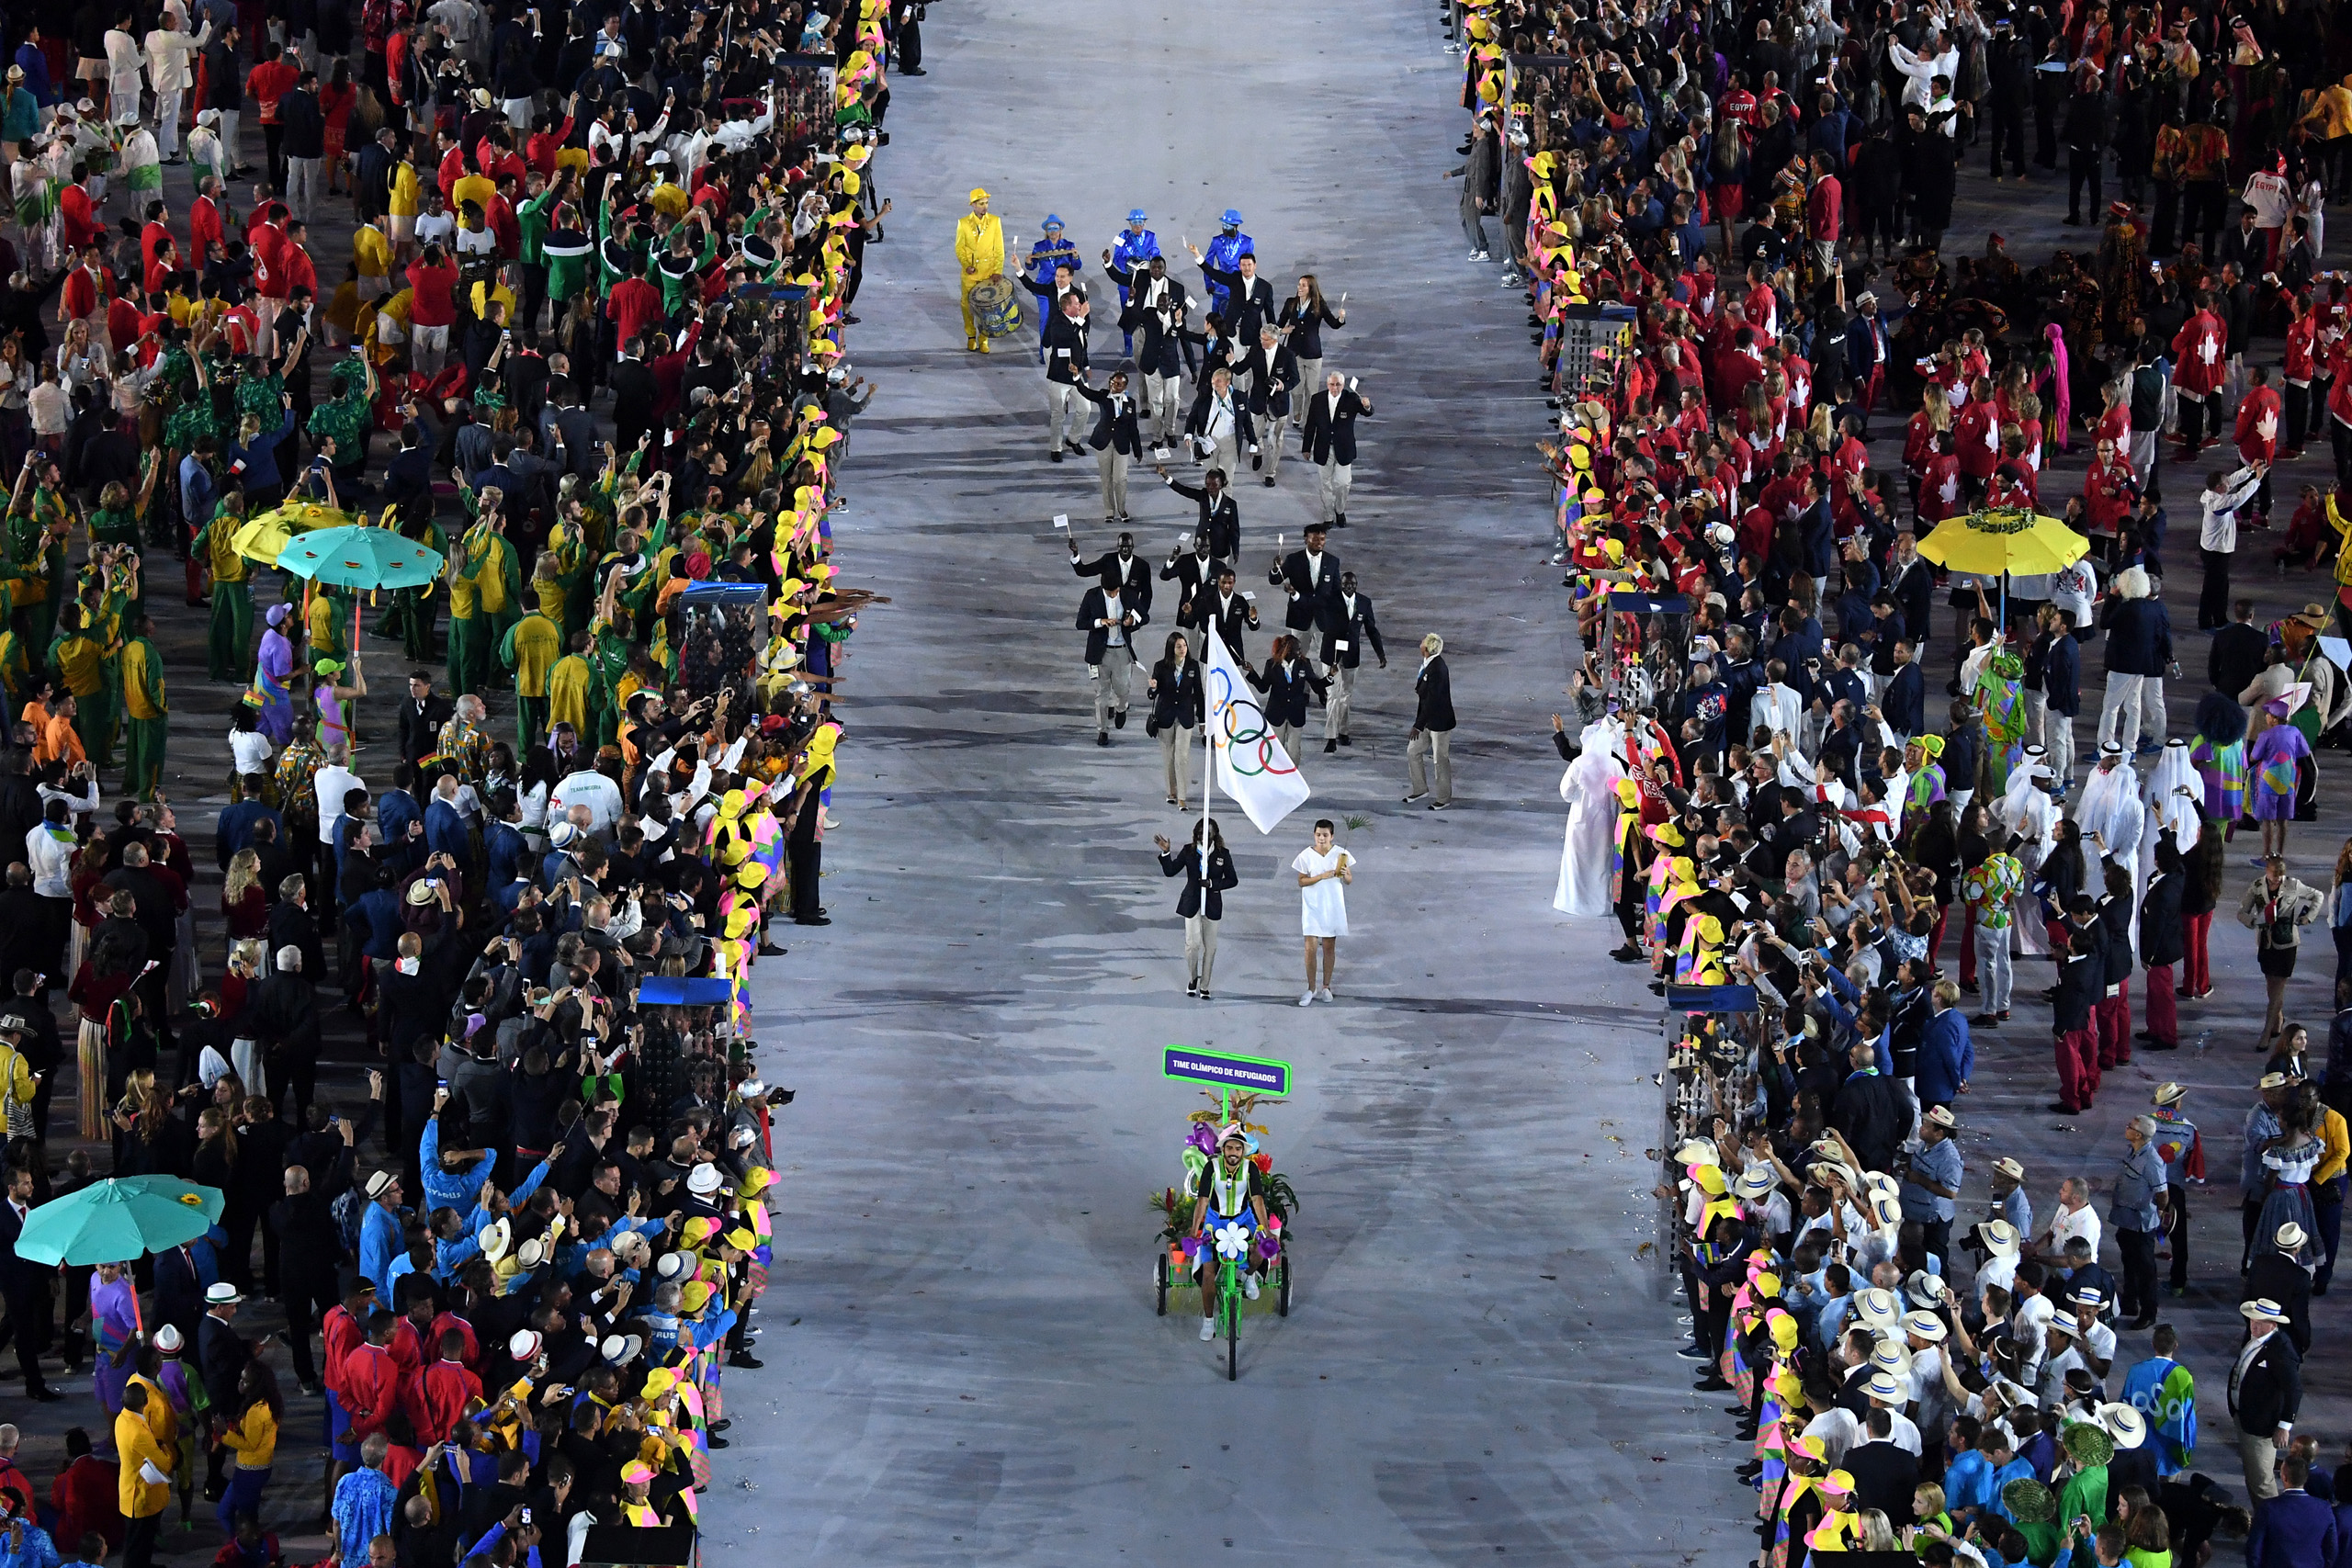 The Olympic Refugee team enter the atheletes parade during the Opening Ceremony of the Rio 2016 Olympic Games at Maracana Stadium in Rio de Janeiro on August 5, 2016. (Richard Heathcote—Getty Images)